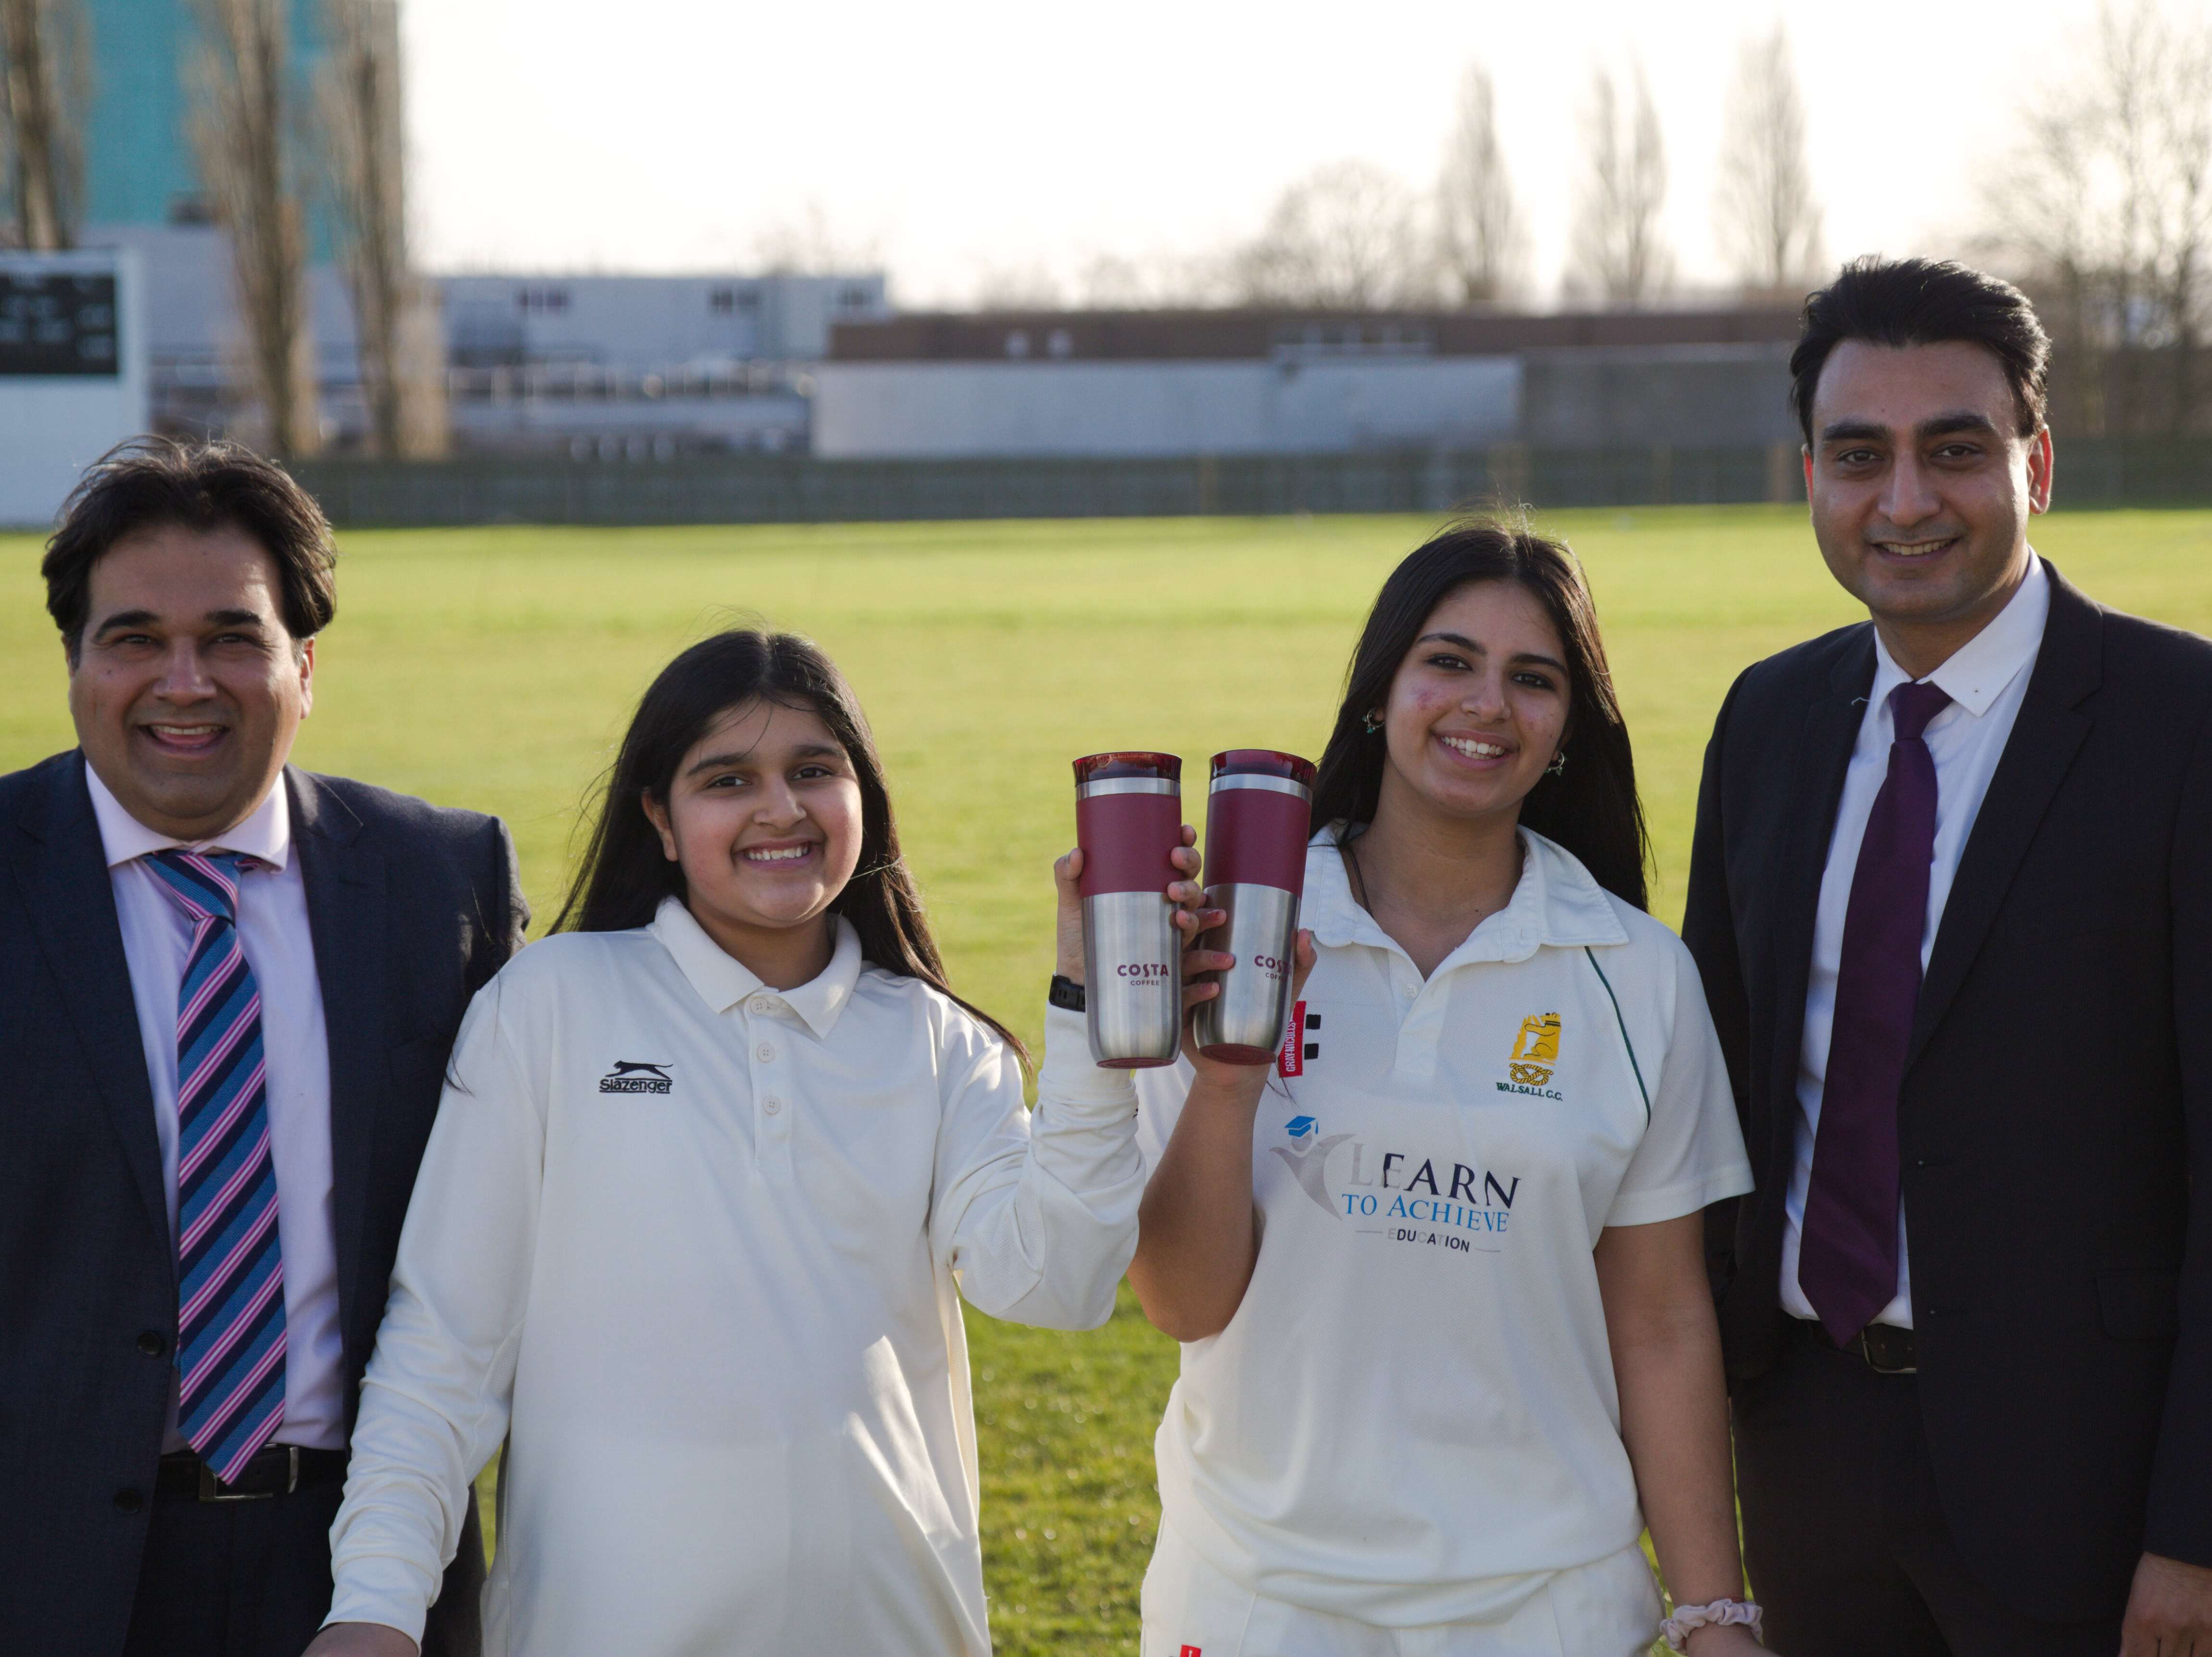 Walsall Cricket Club full of beans with donation to support first girls team